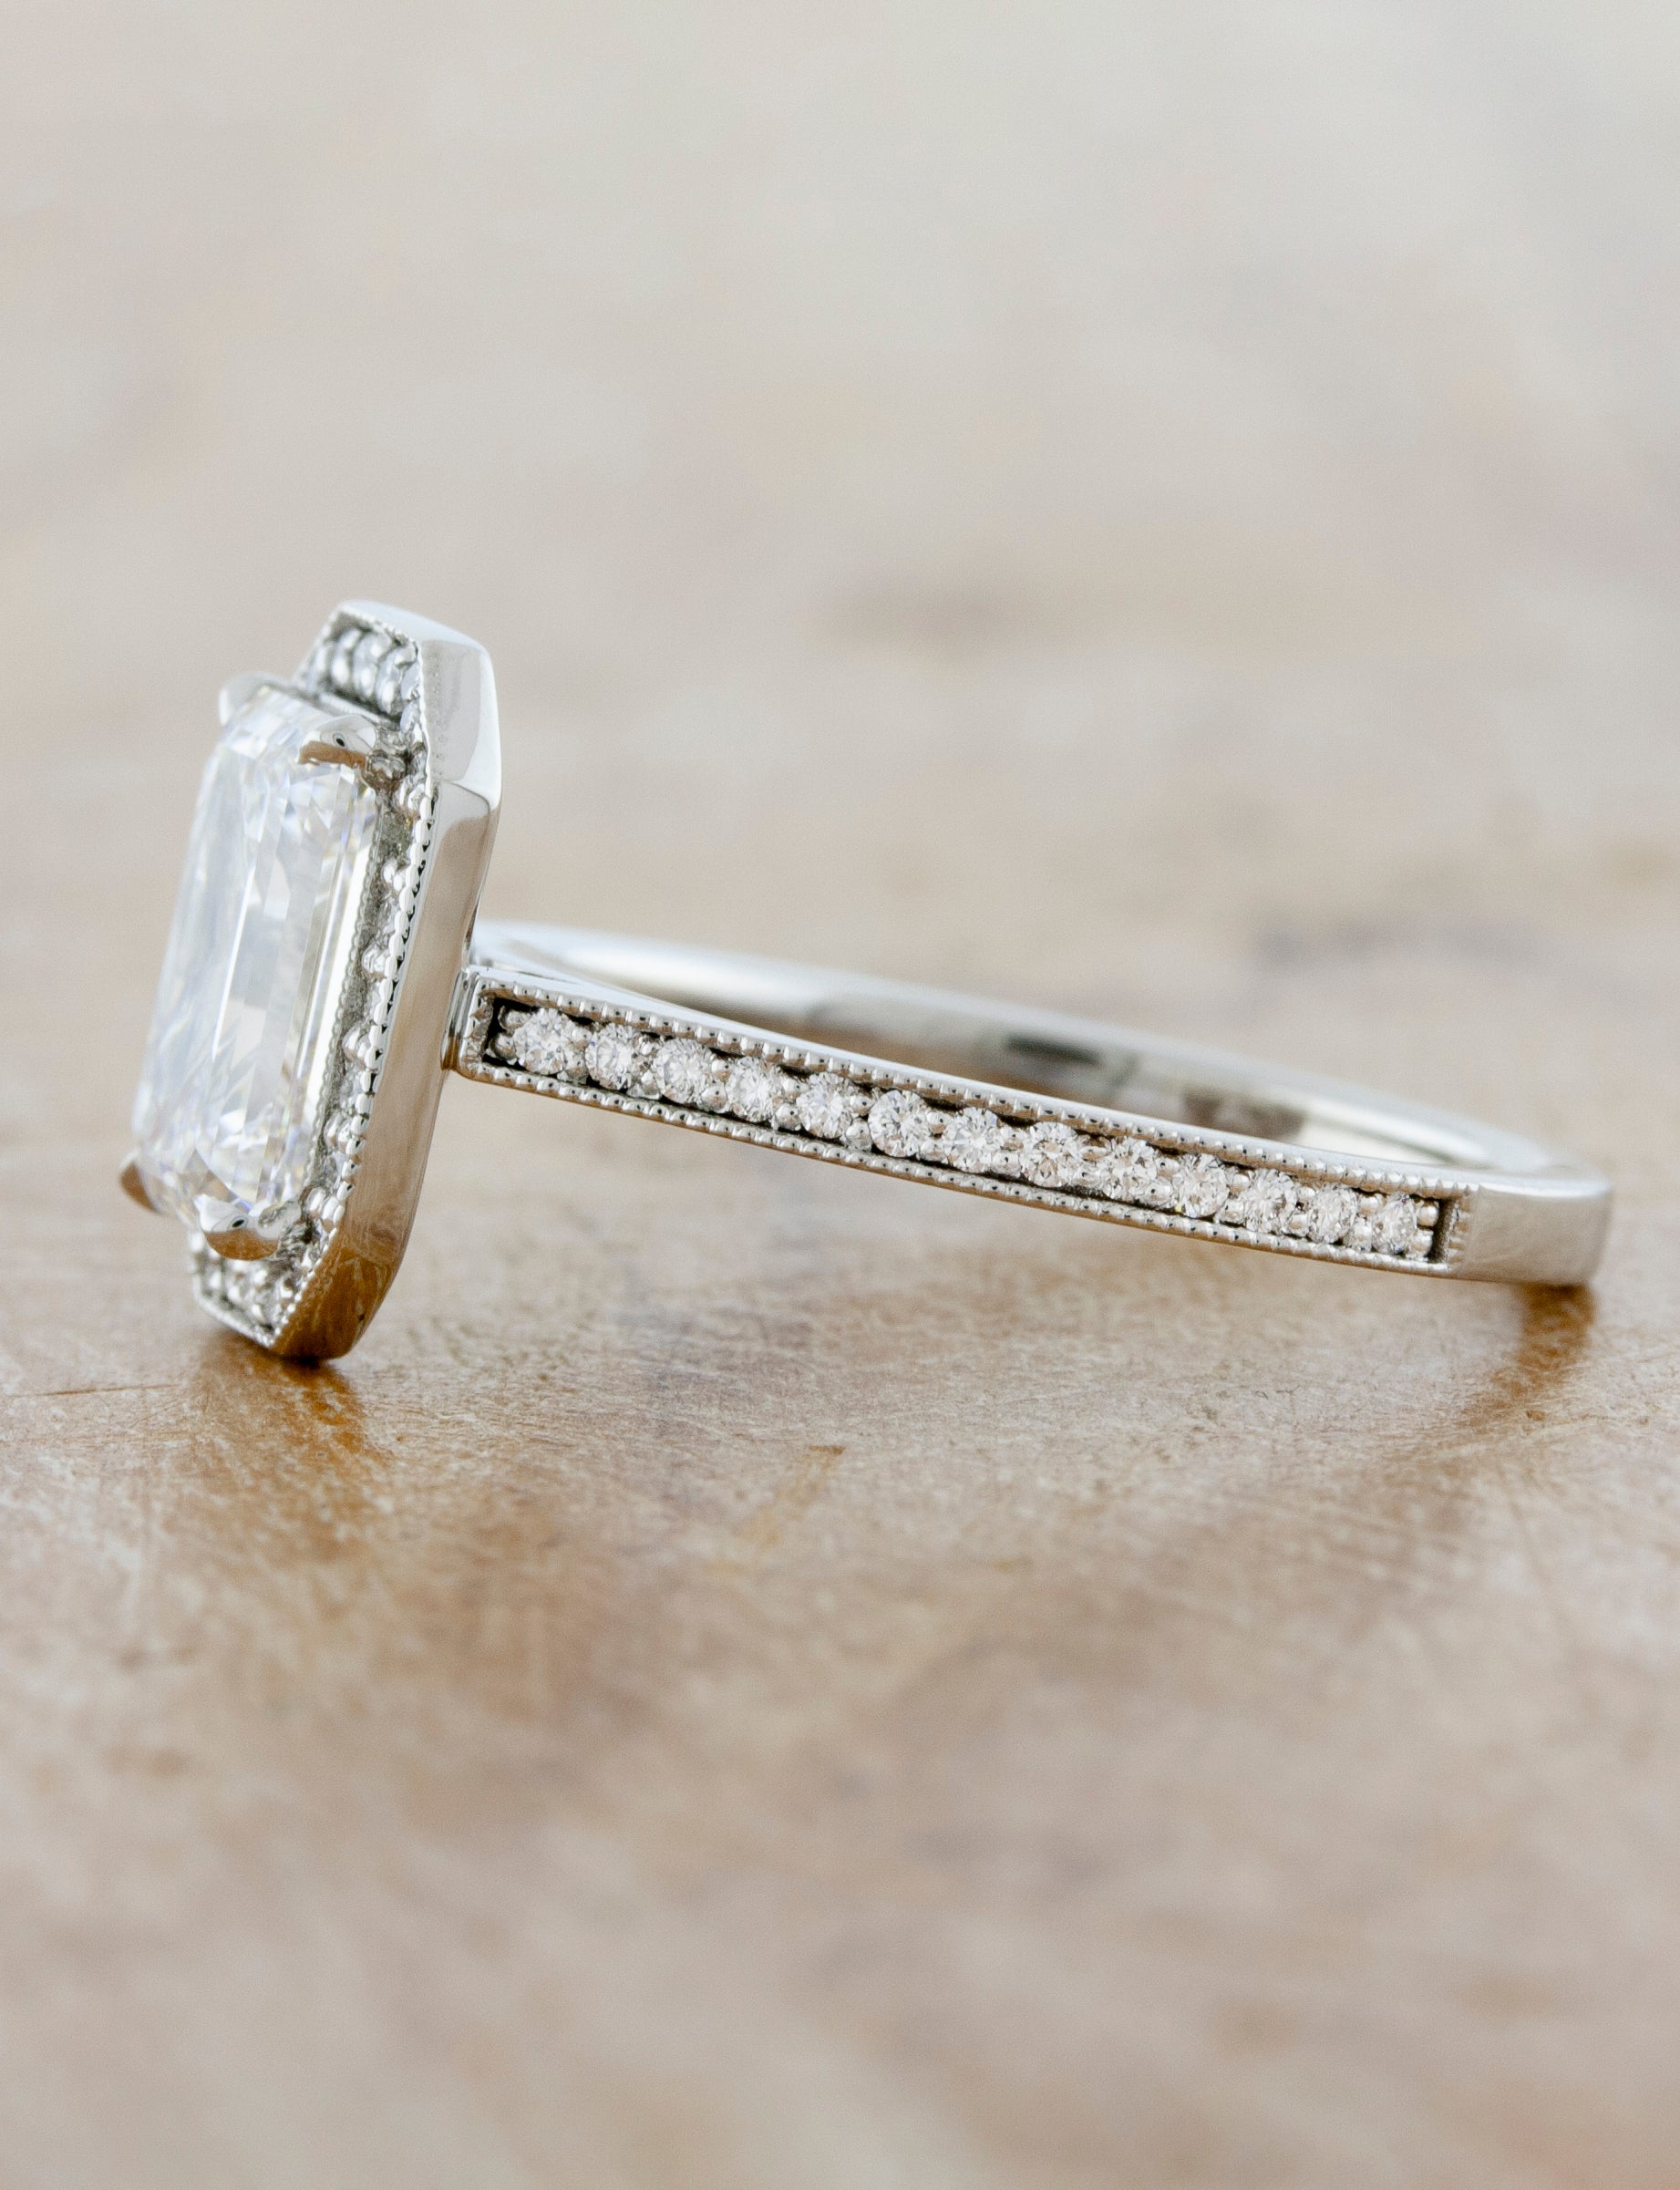 caption:Shown in platinum with a 2.3ct center diamond